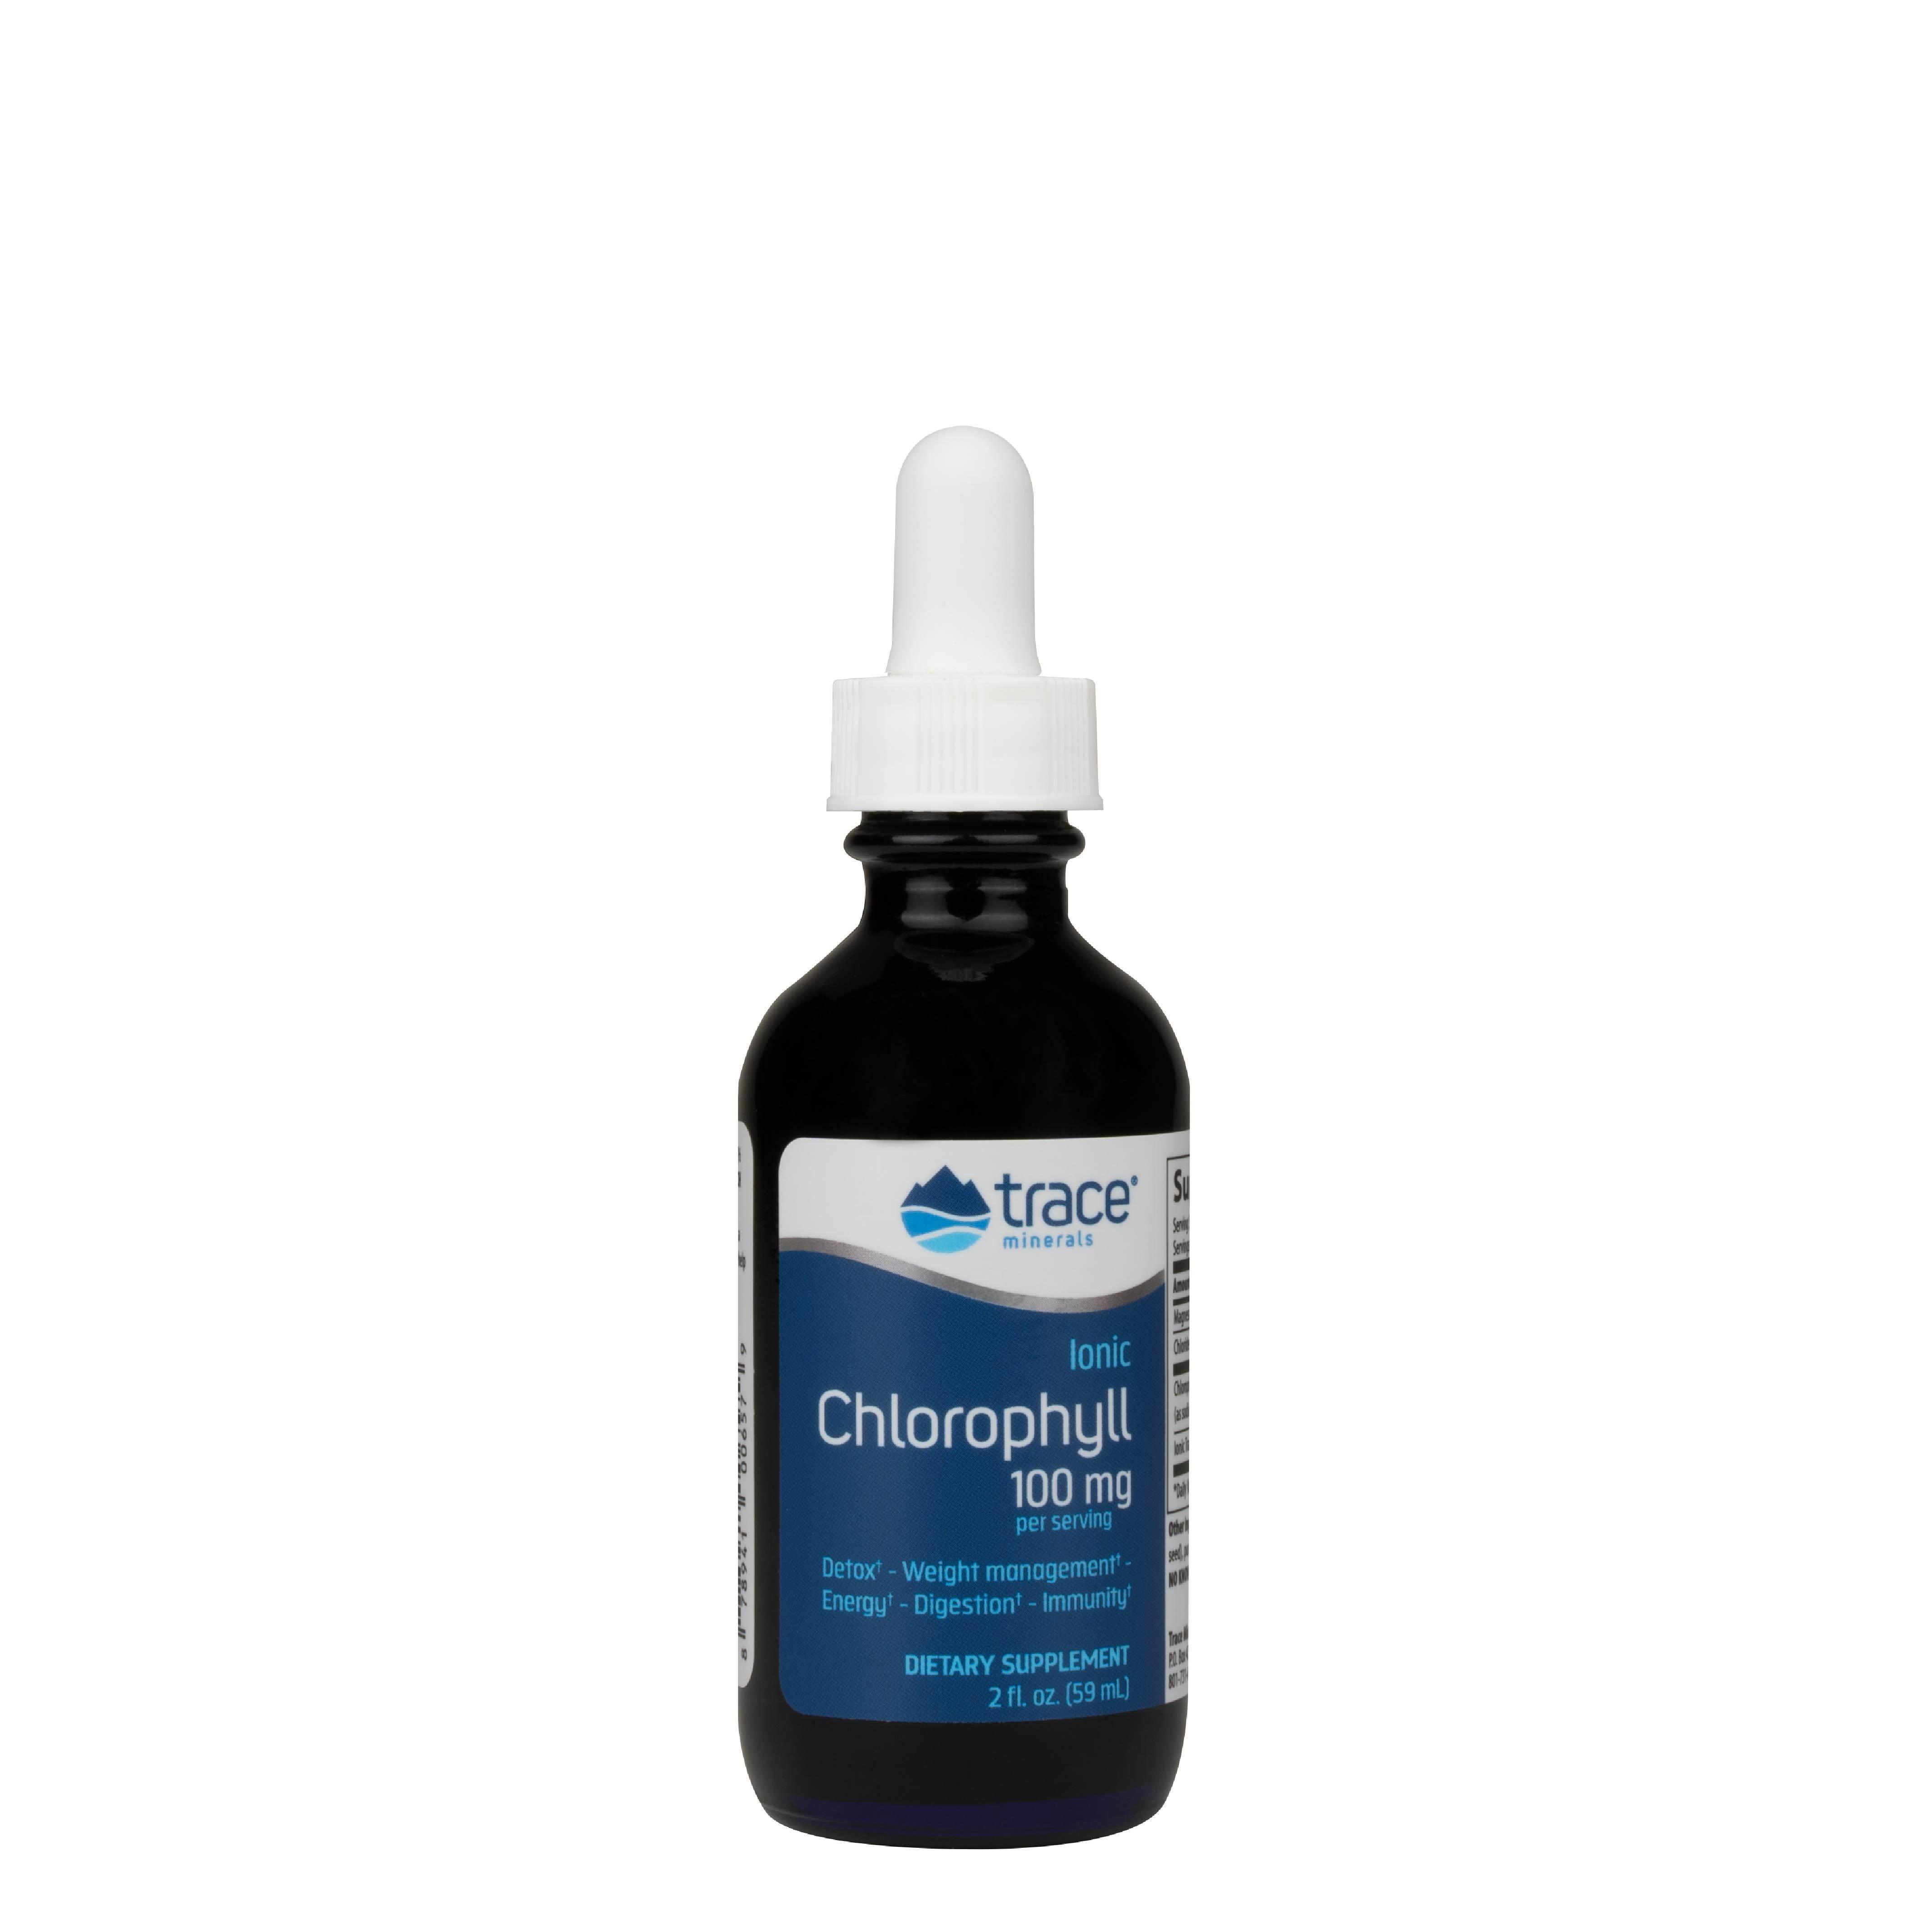 Ionic Chlorophyll - Trace Minerals